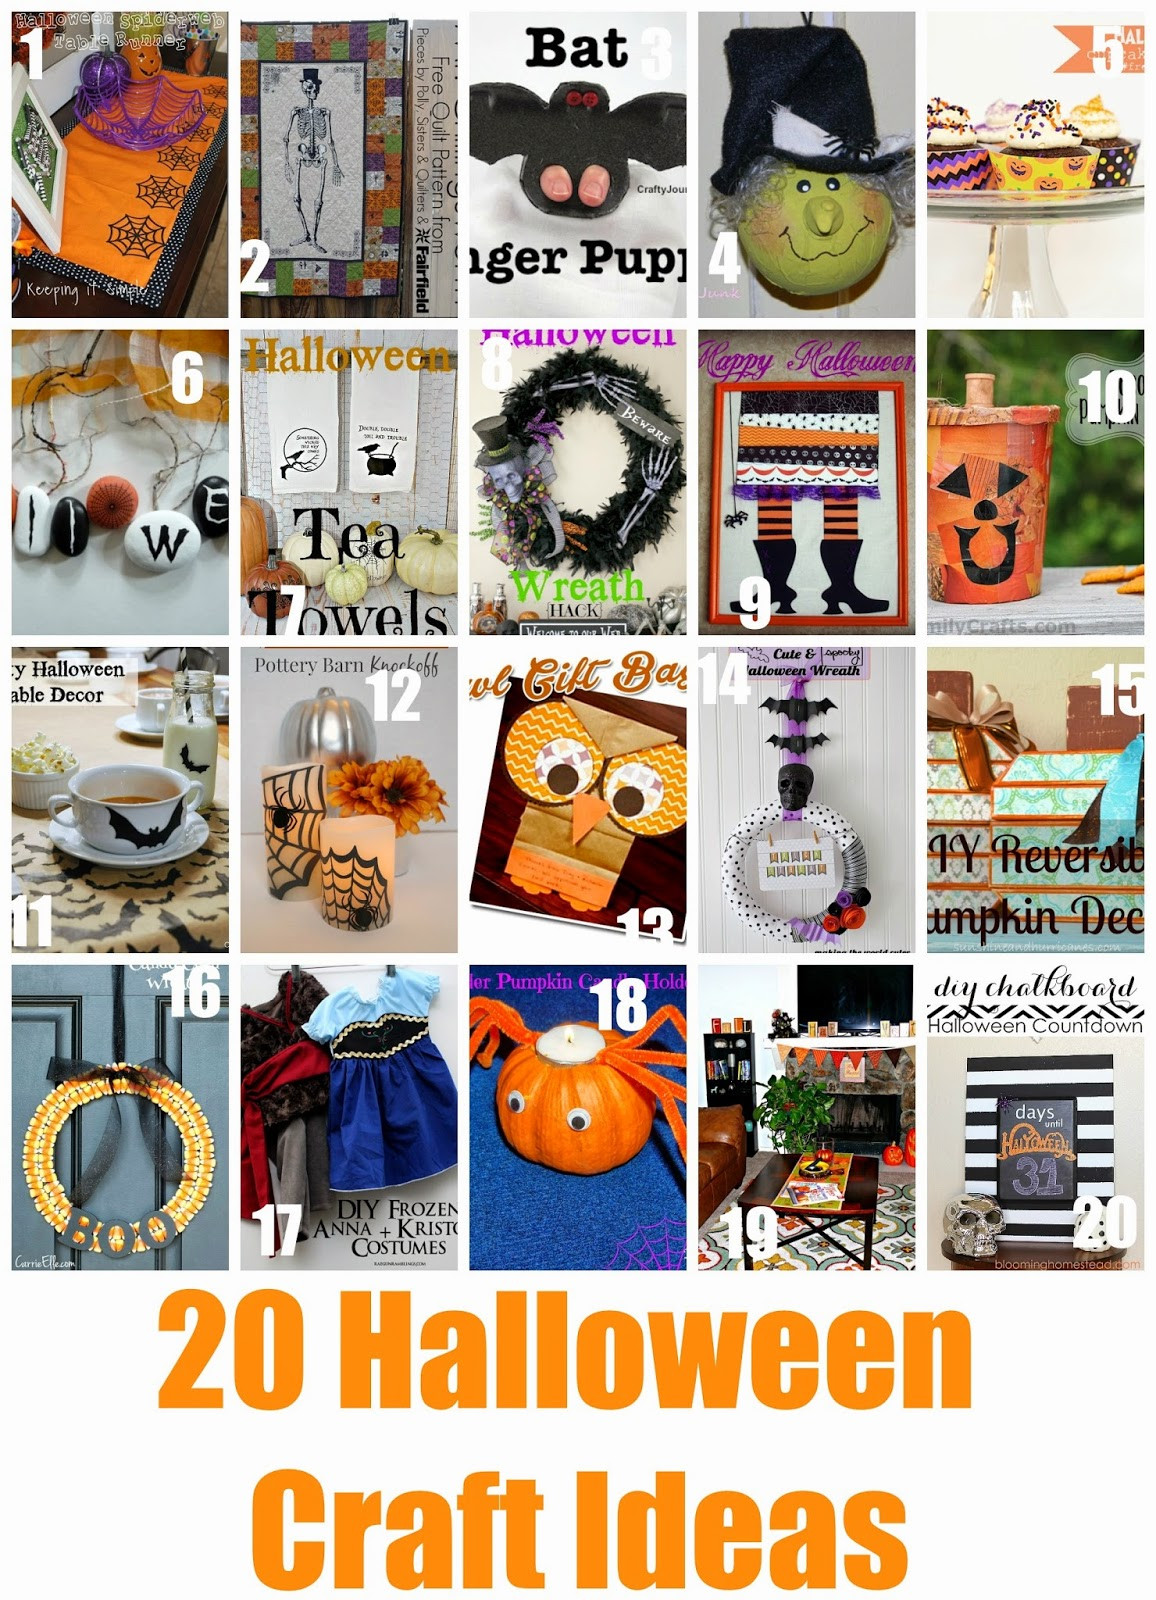 Halloween Party Craft Ideas
 Block Party 20 Halloween Craft Ideas Features Page 2 of